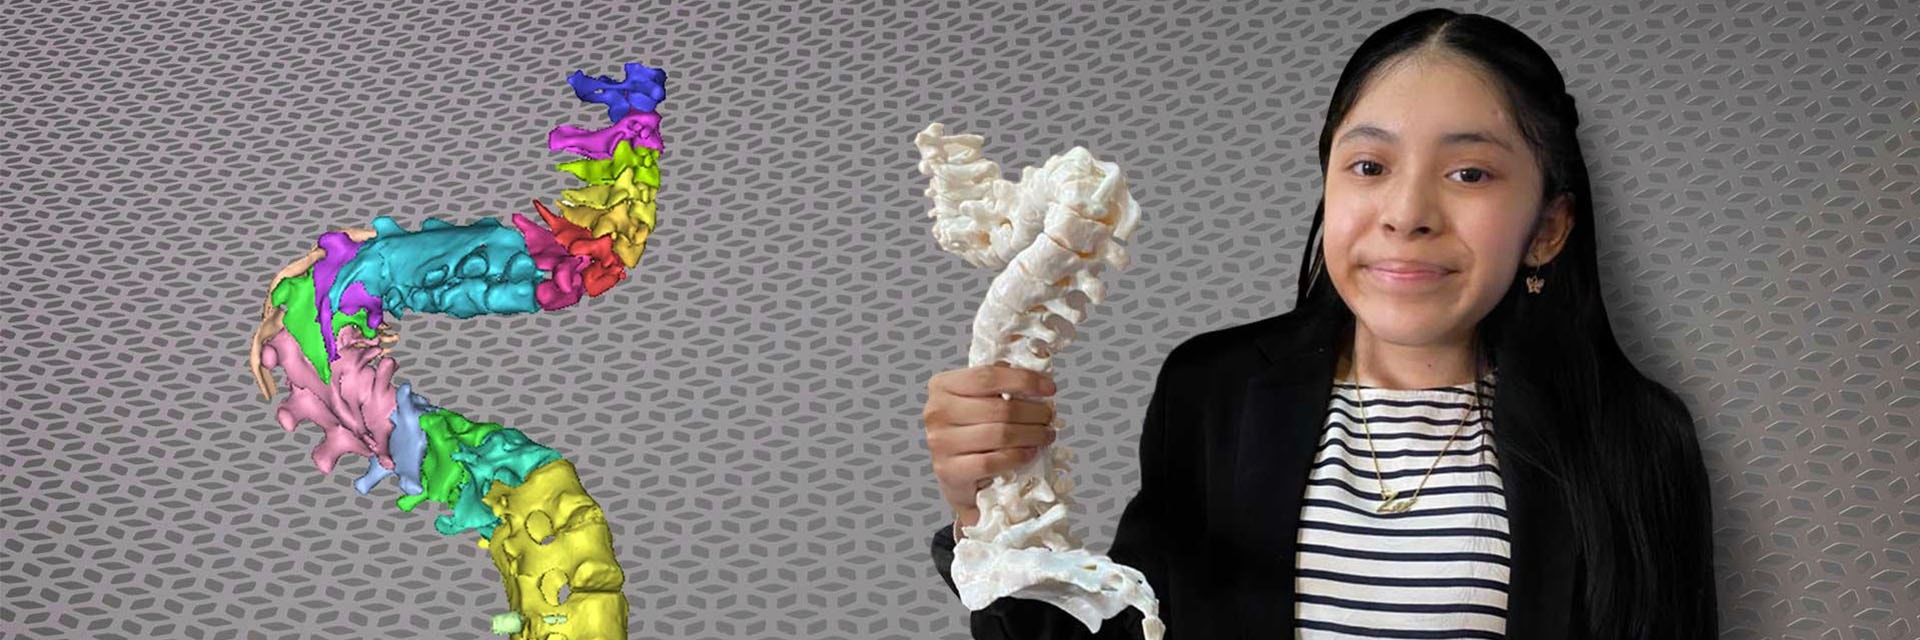 Patient holding a 3D-printed model of her spine next to a digital image of her spine